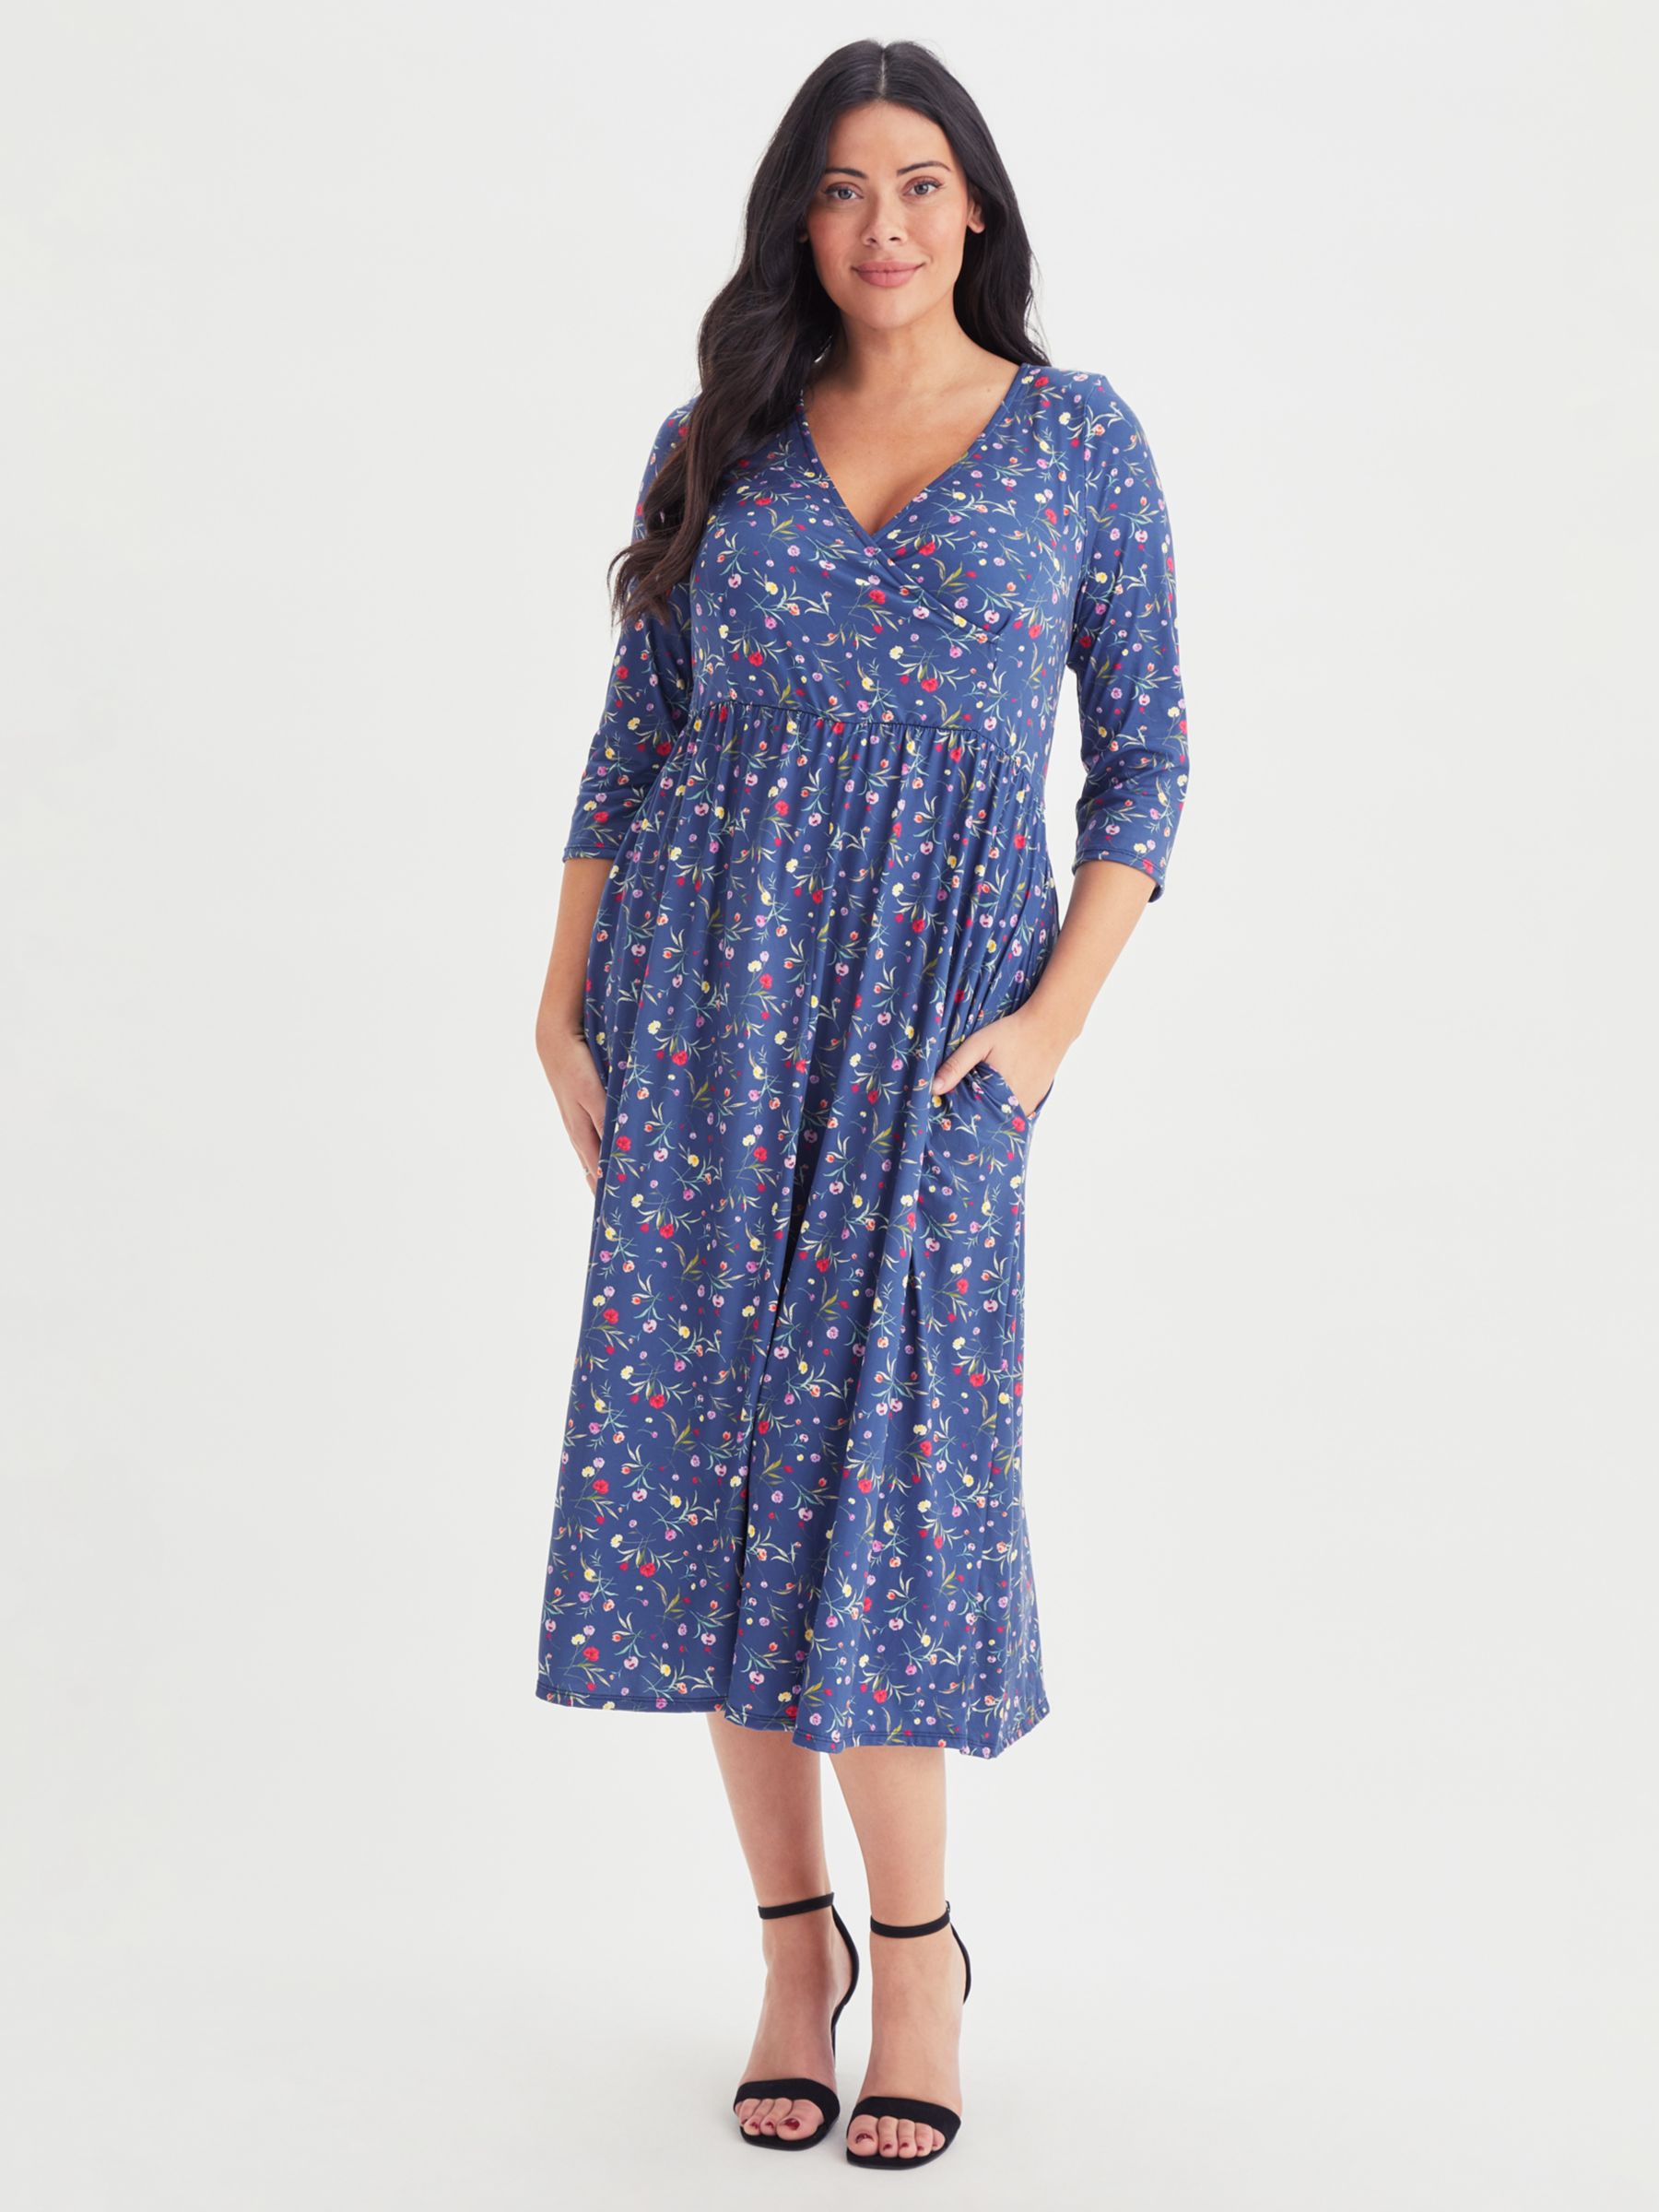 The Best Dress For A Pear Body Shape - Pacific Globetrotters